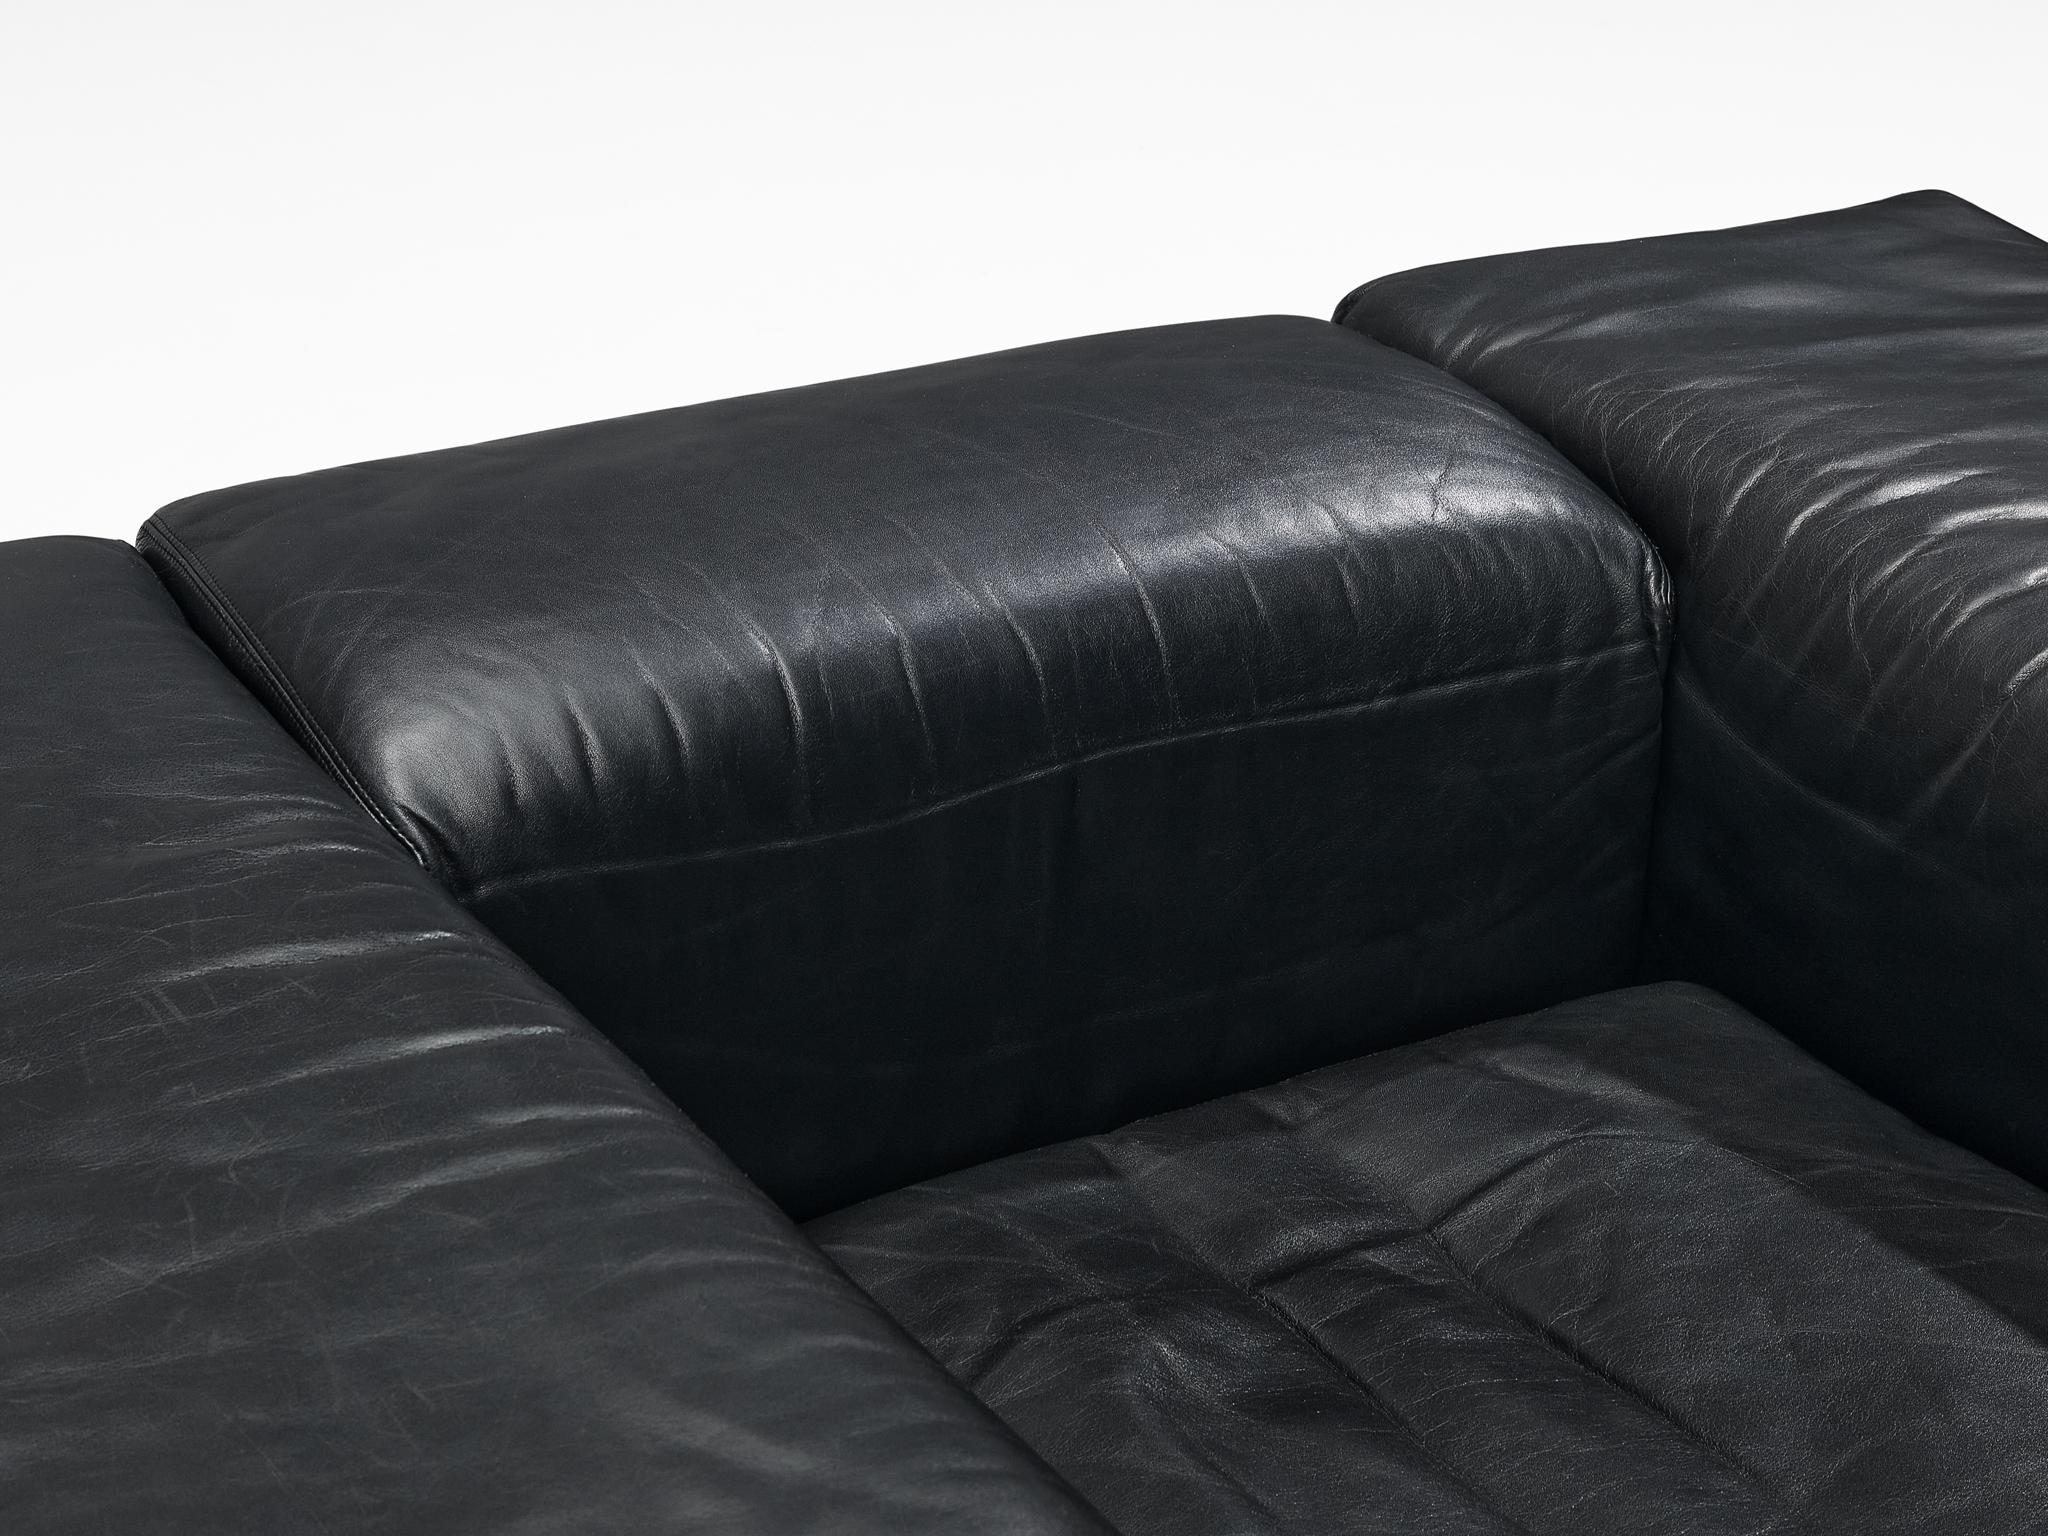 Cini Boeri for Knoll 'Brigadiere' Living Room Set in Black Leather 1